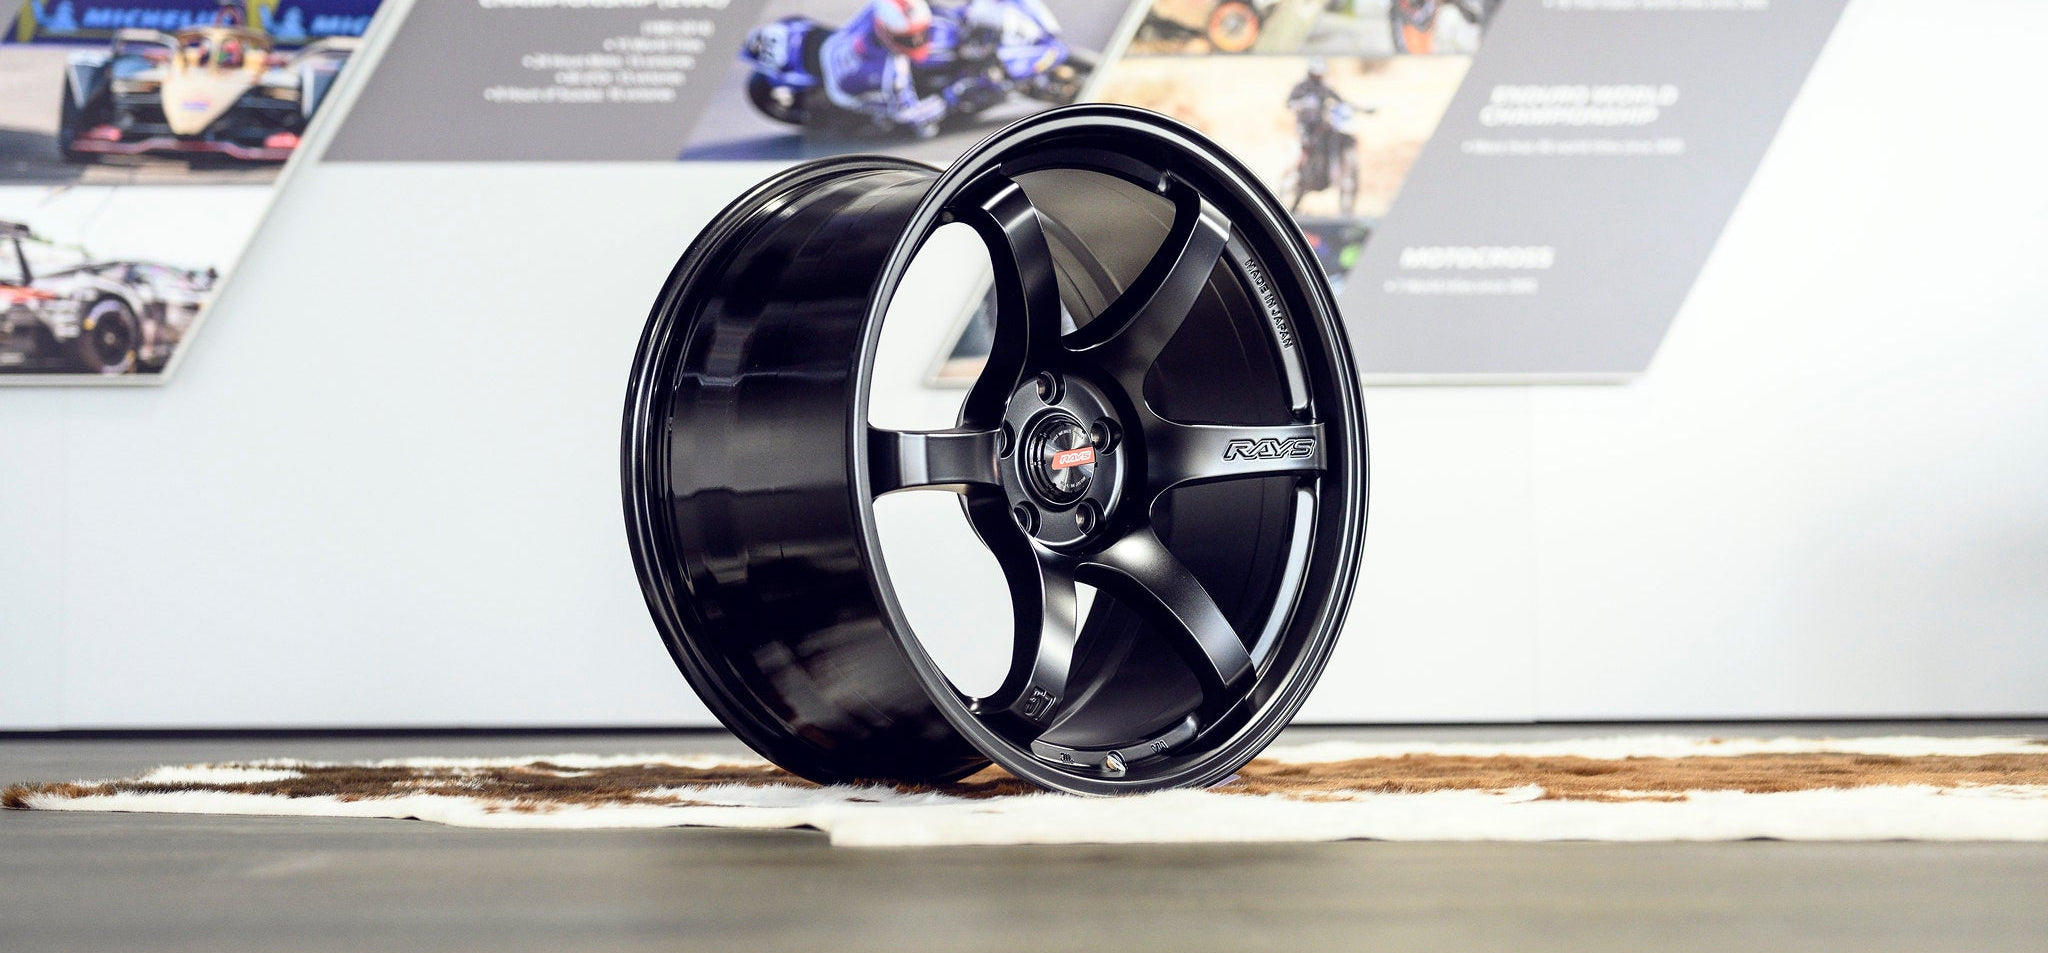 gramLIGHTS 57DR for A90 Supra - Premium Wheels from Gram Lights - From just $3190.0! Shop now at MK MOTORSPORTS